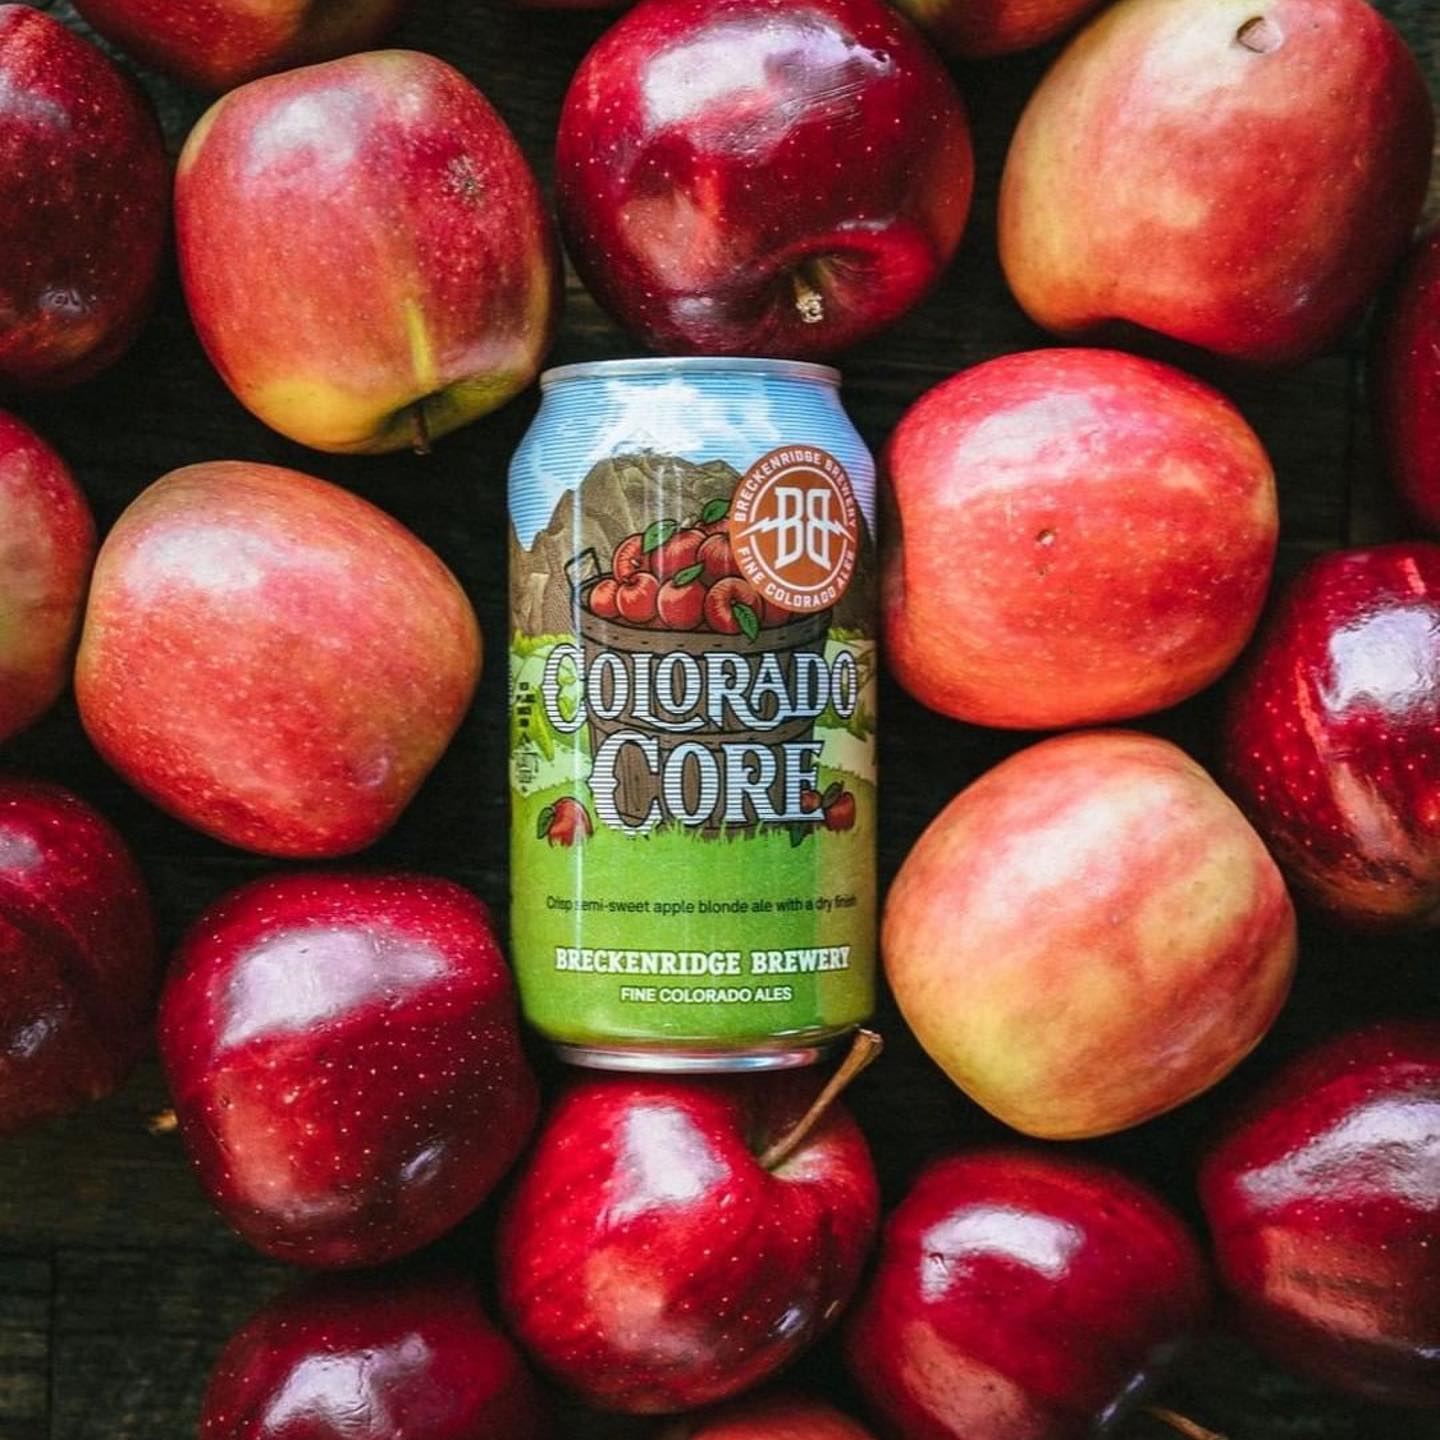 Apple flavored beer can surrounded by apples